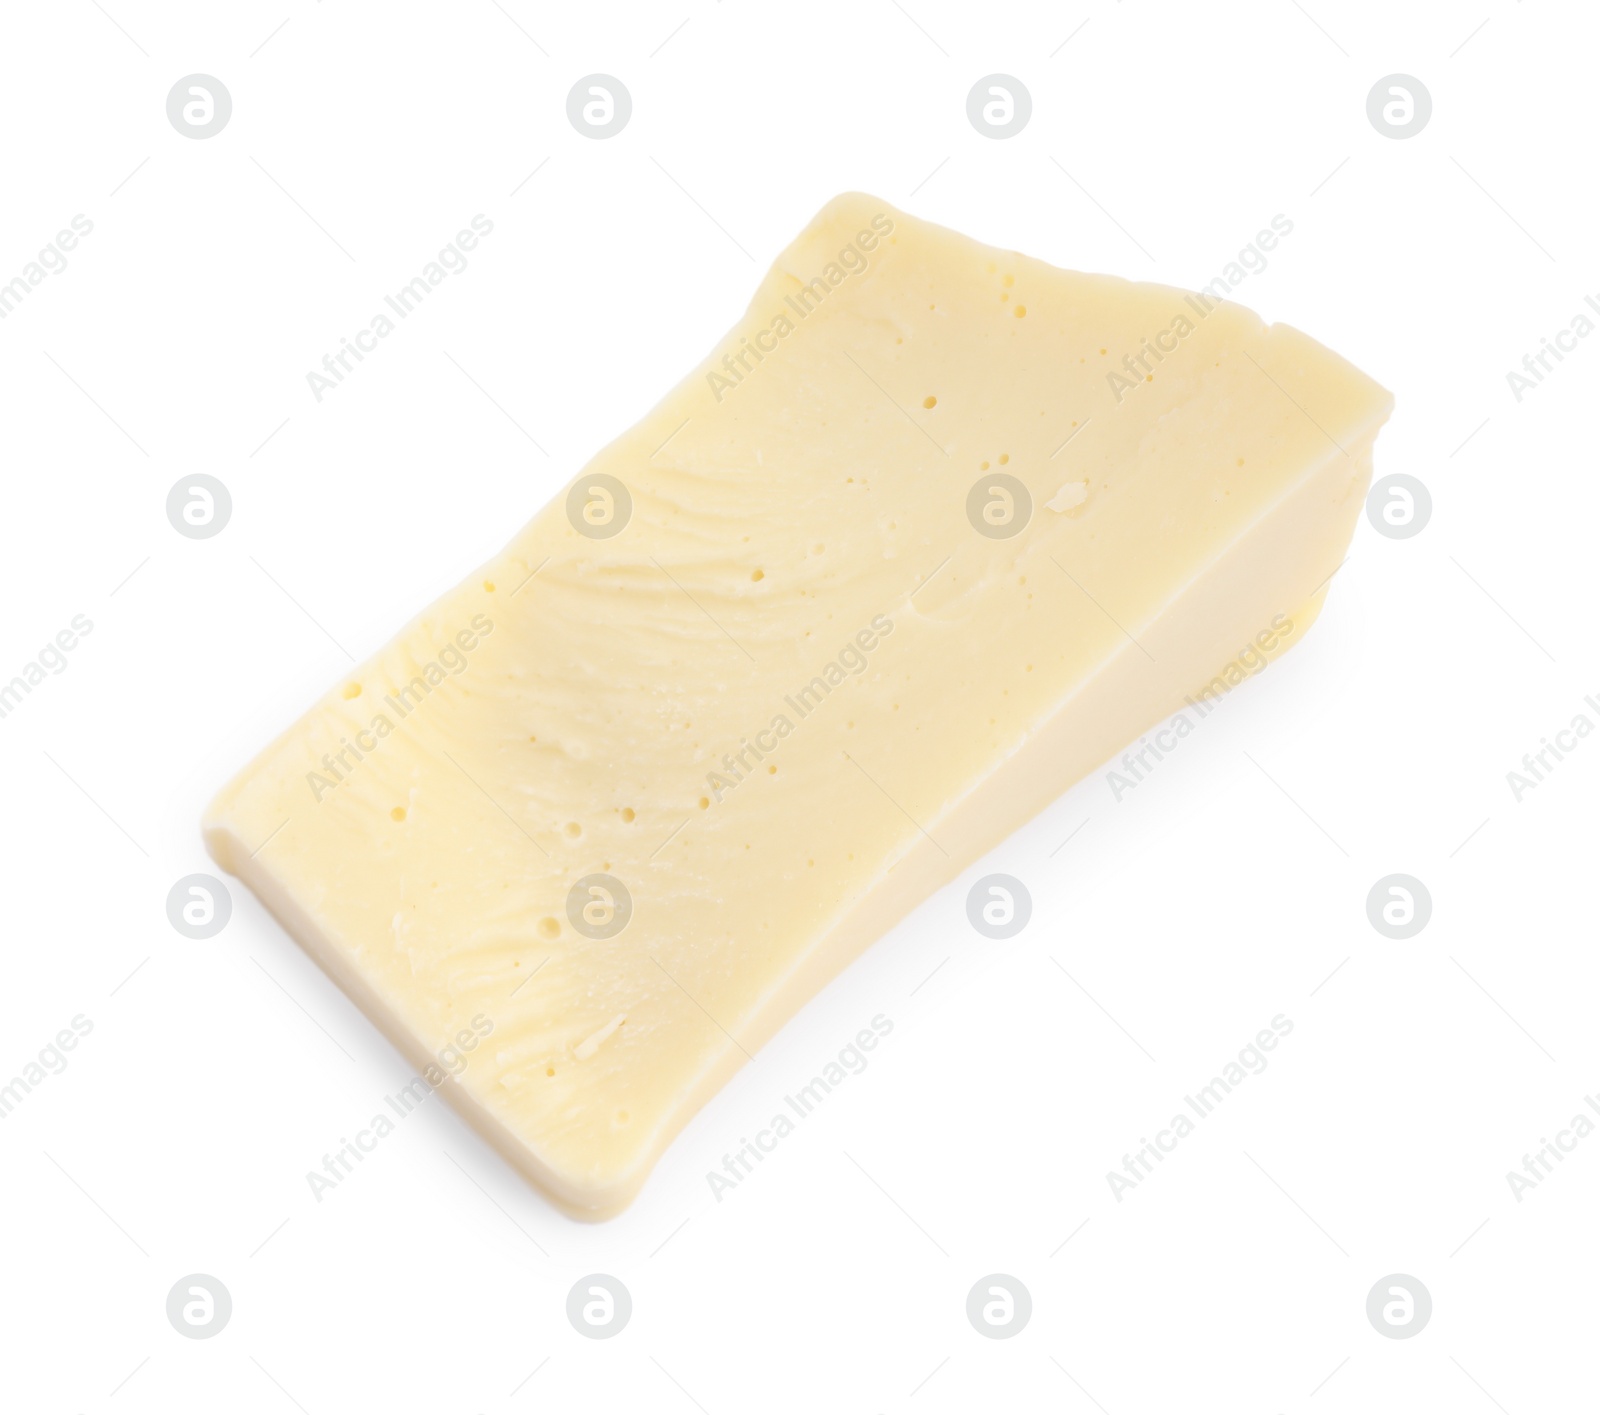 Photo of Piece of tasty chocolate isolated on white